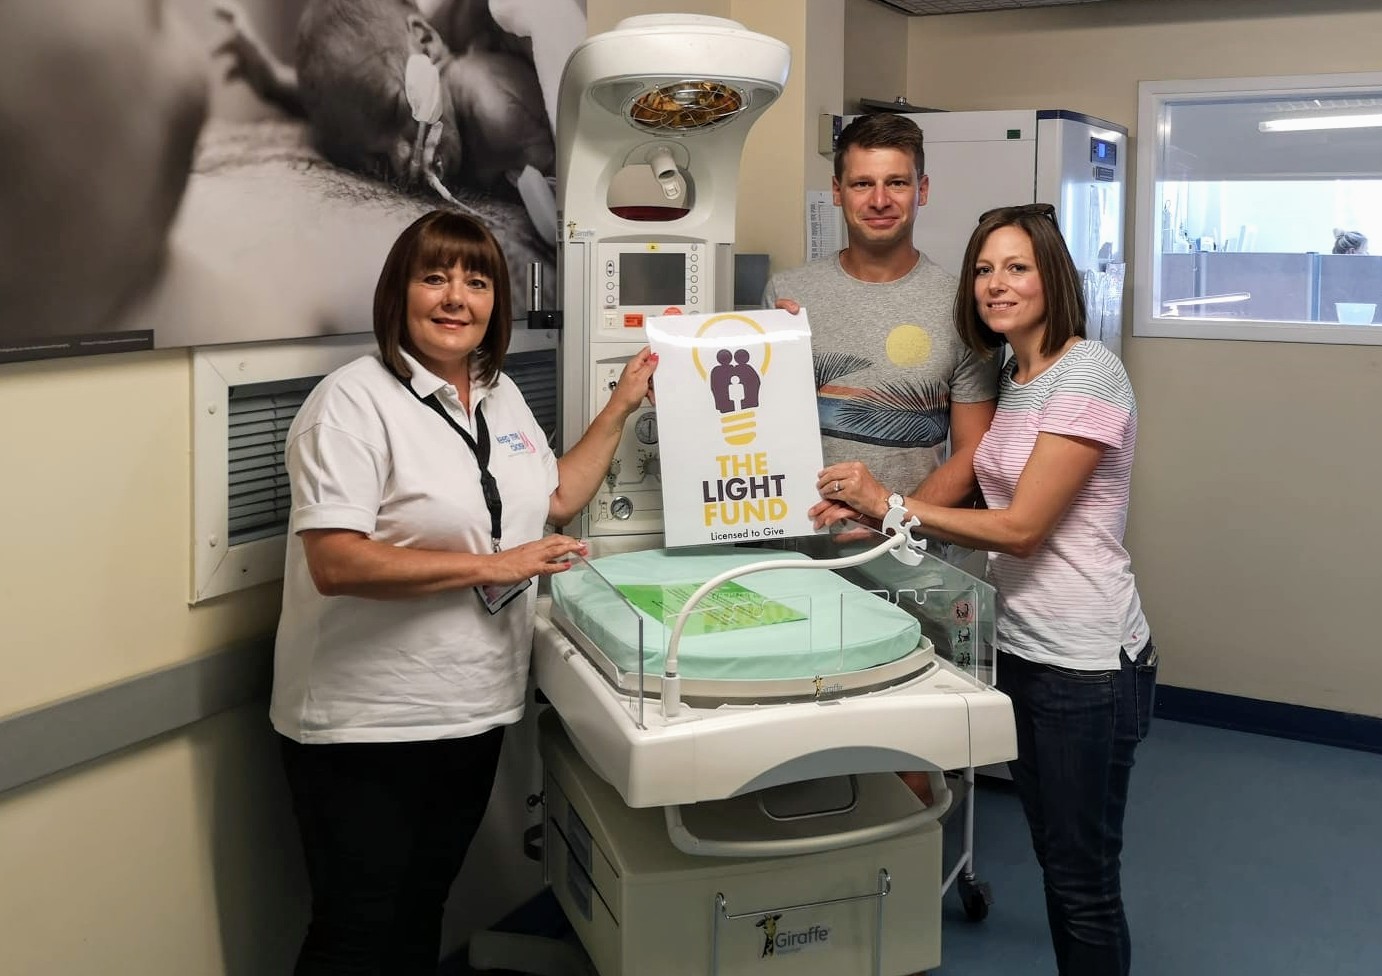 Above: Two parents who had premature babies presebted the hot bed to the Special Care Baby Unit at Plymouth hospital on behalf of New Life, with The Light Fund covering the costs. 